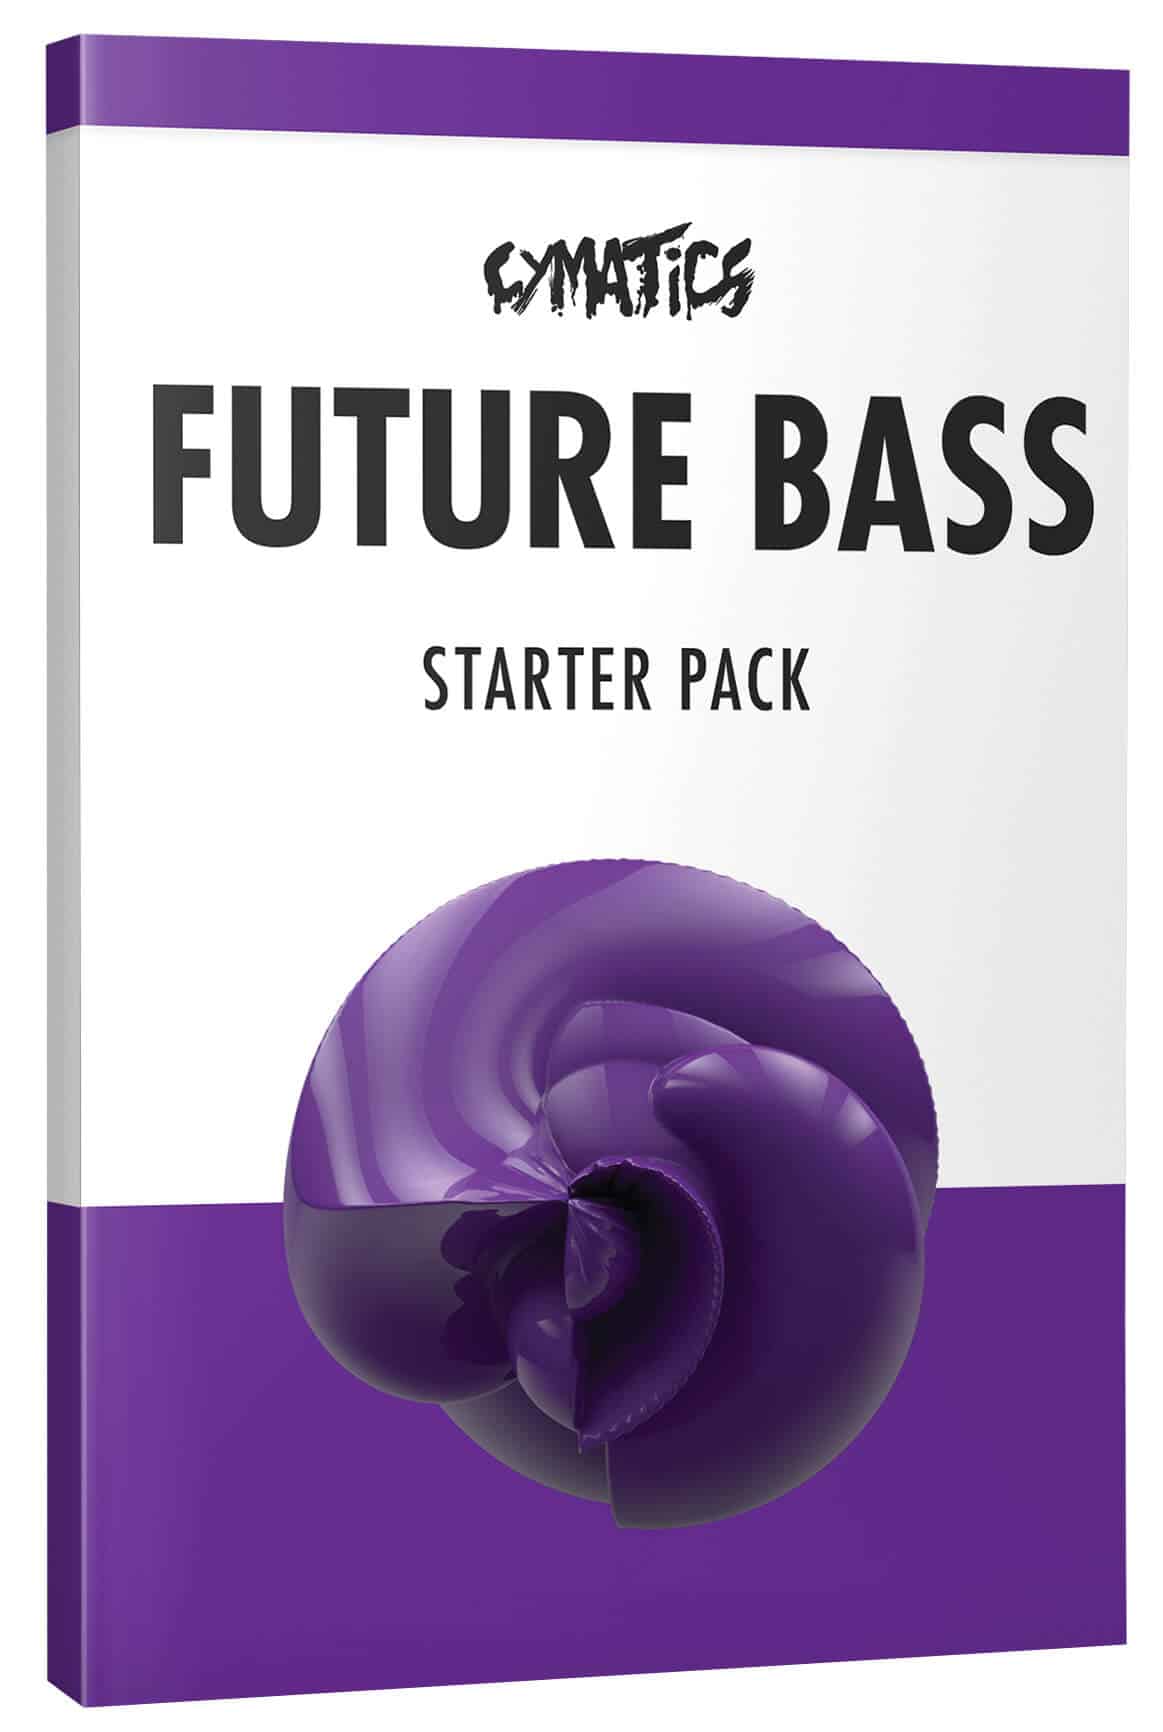 Future Bass Starter Pack. This pack is the perfect introduction to the world of Future Bass. With a combination of powerful basslines, catchy melodies, and energetic beats, this starter pack provides everything you need